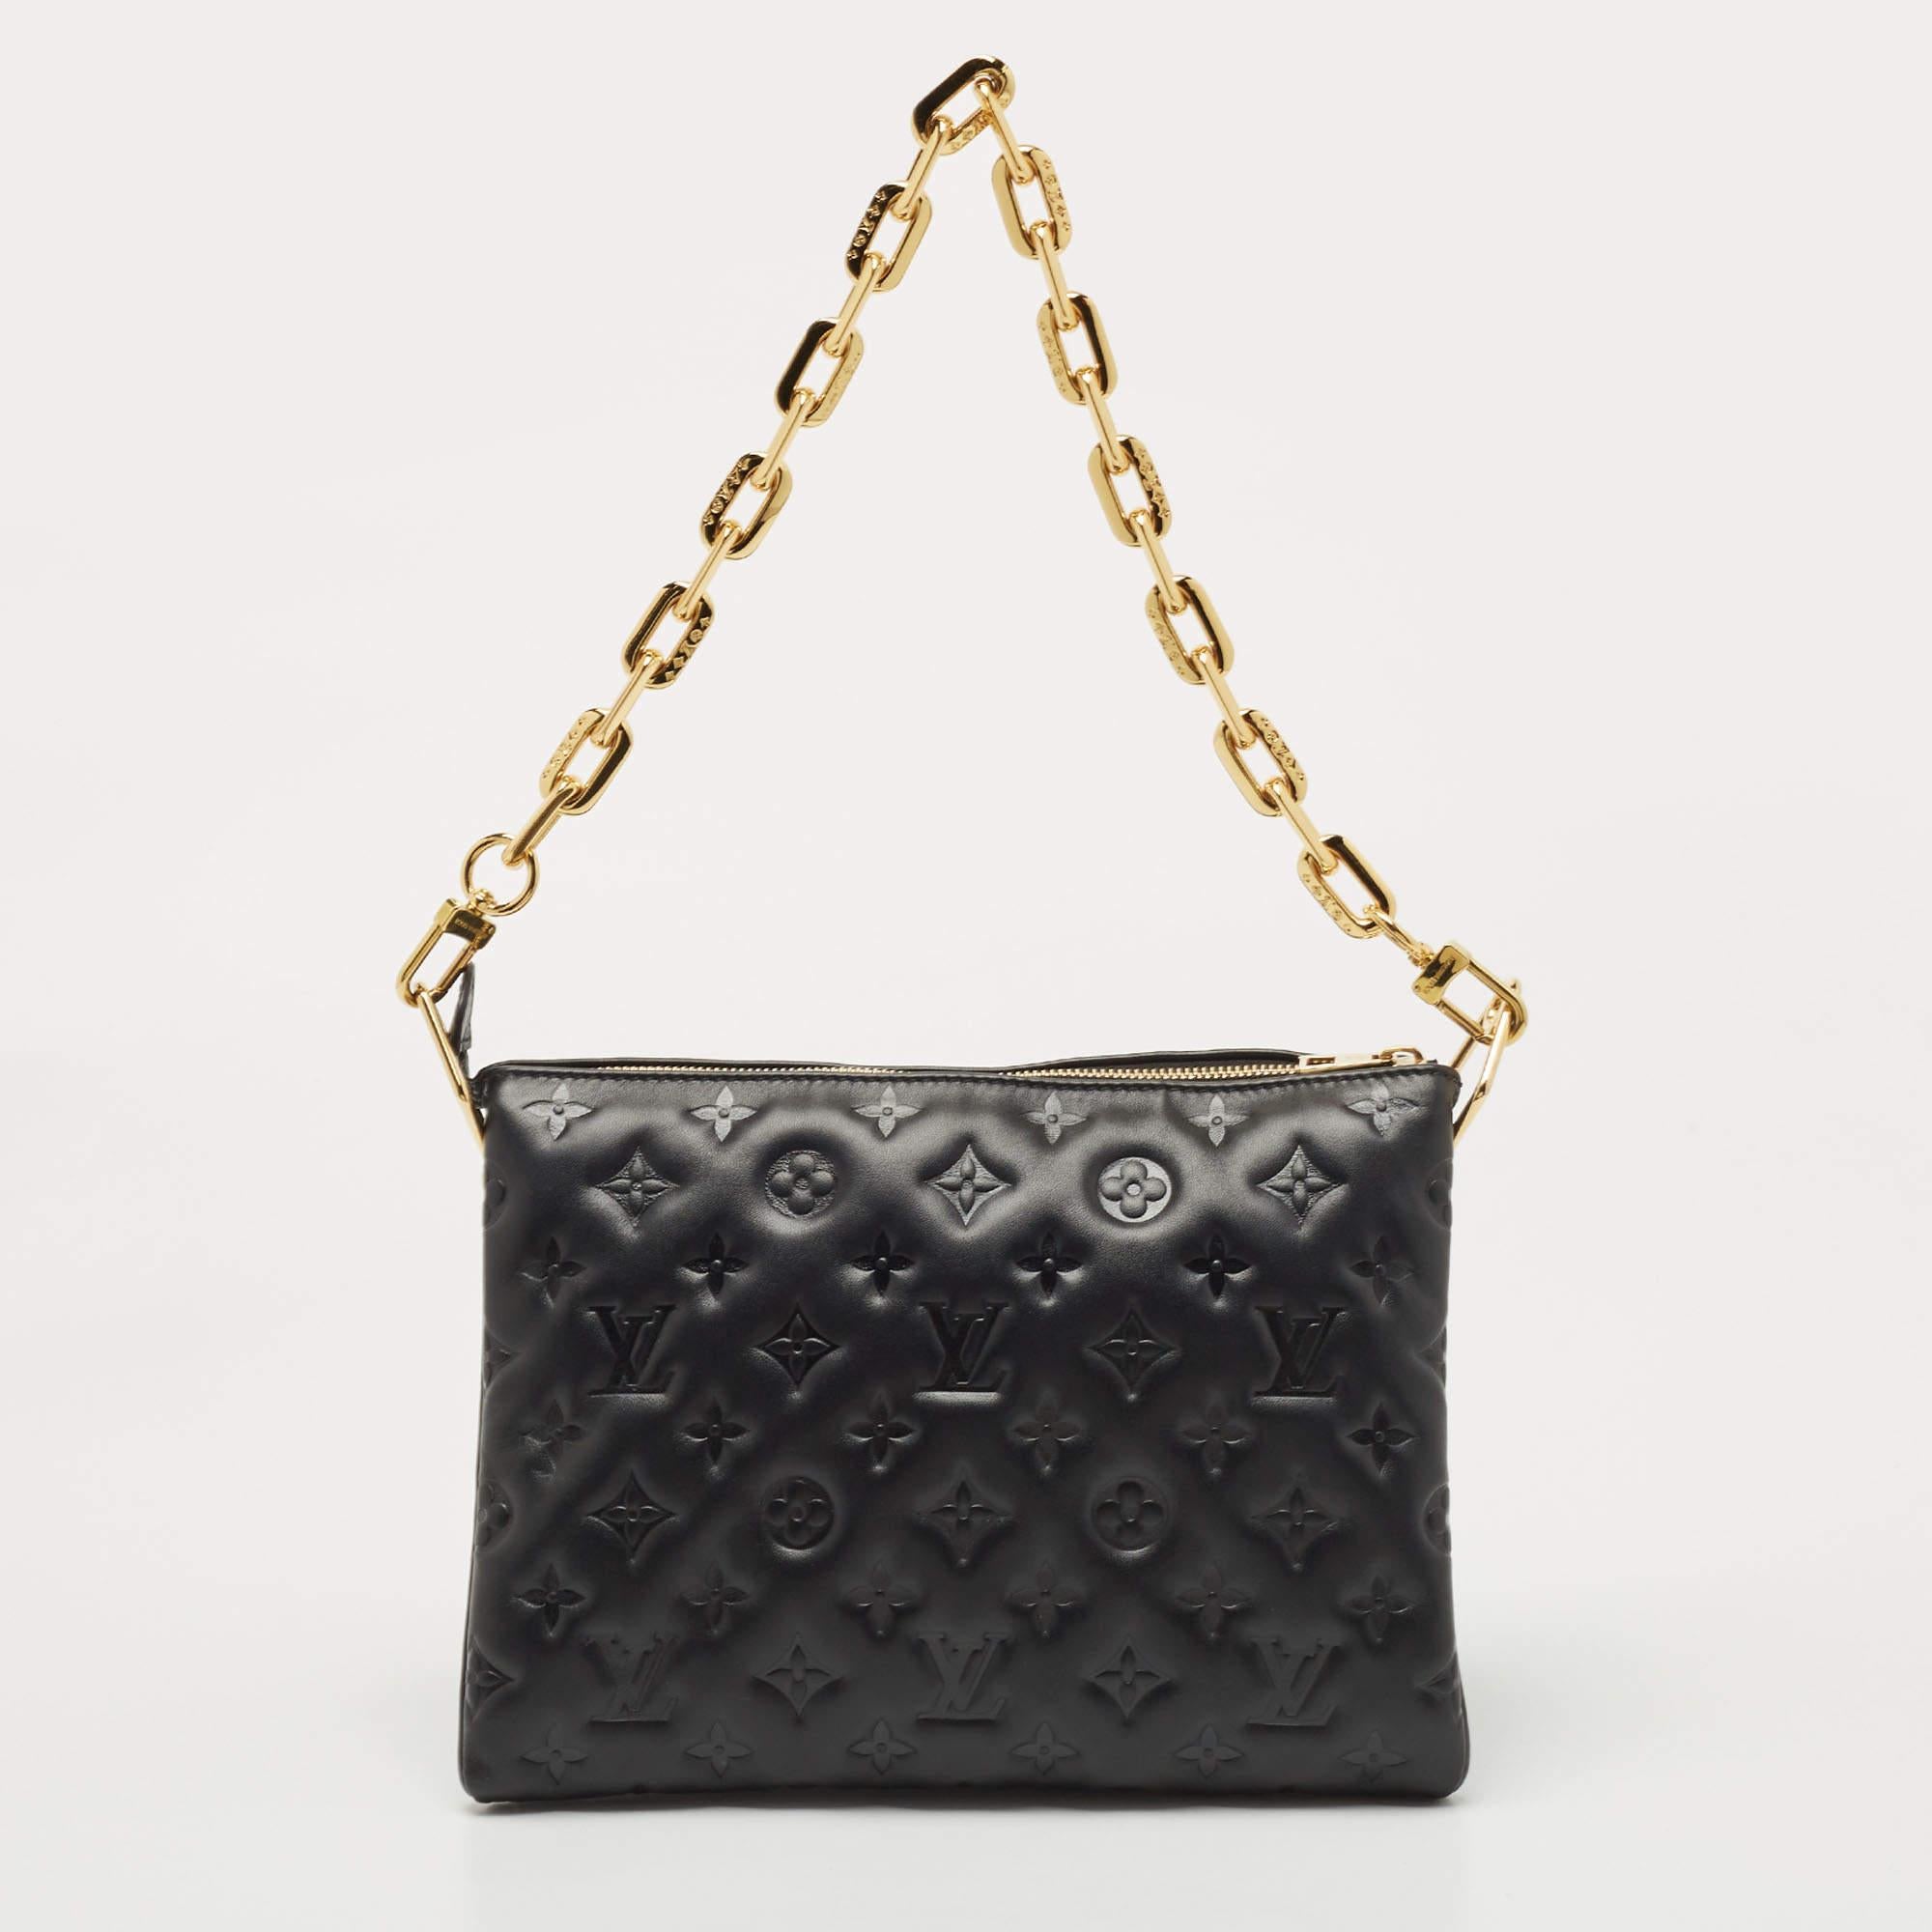 Made skillfully from embossed leather, this Louis Vuitton bag is super-chic and versatile. The black bag comes with a detachable chain and strap and flaunts a structured shape. It is the perfect day-to-night accessory to add to your